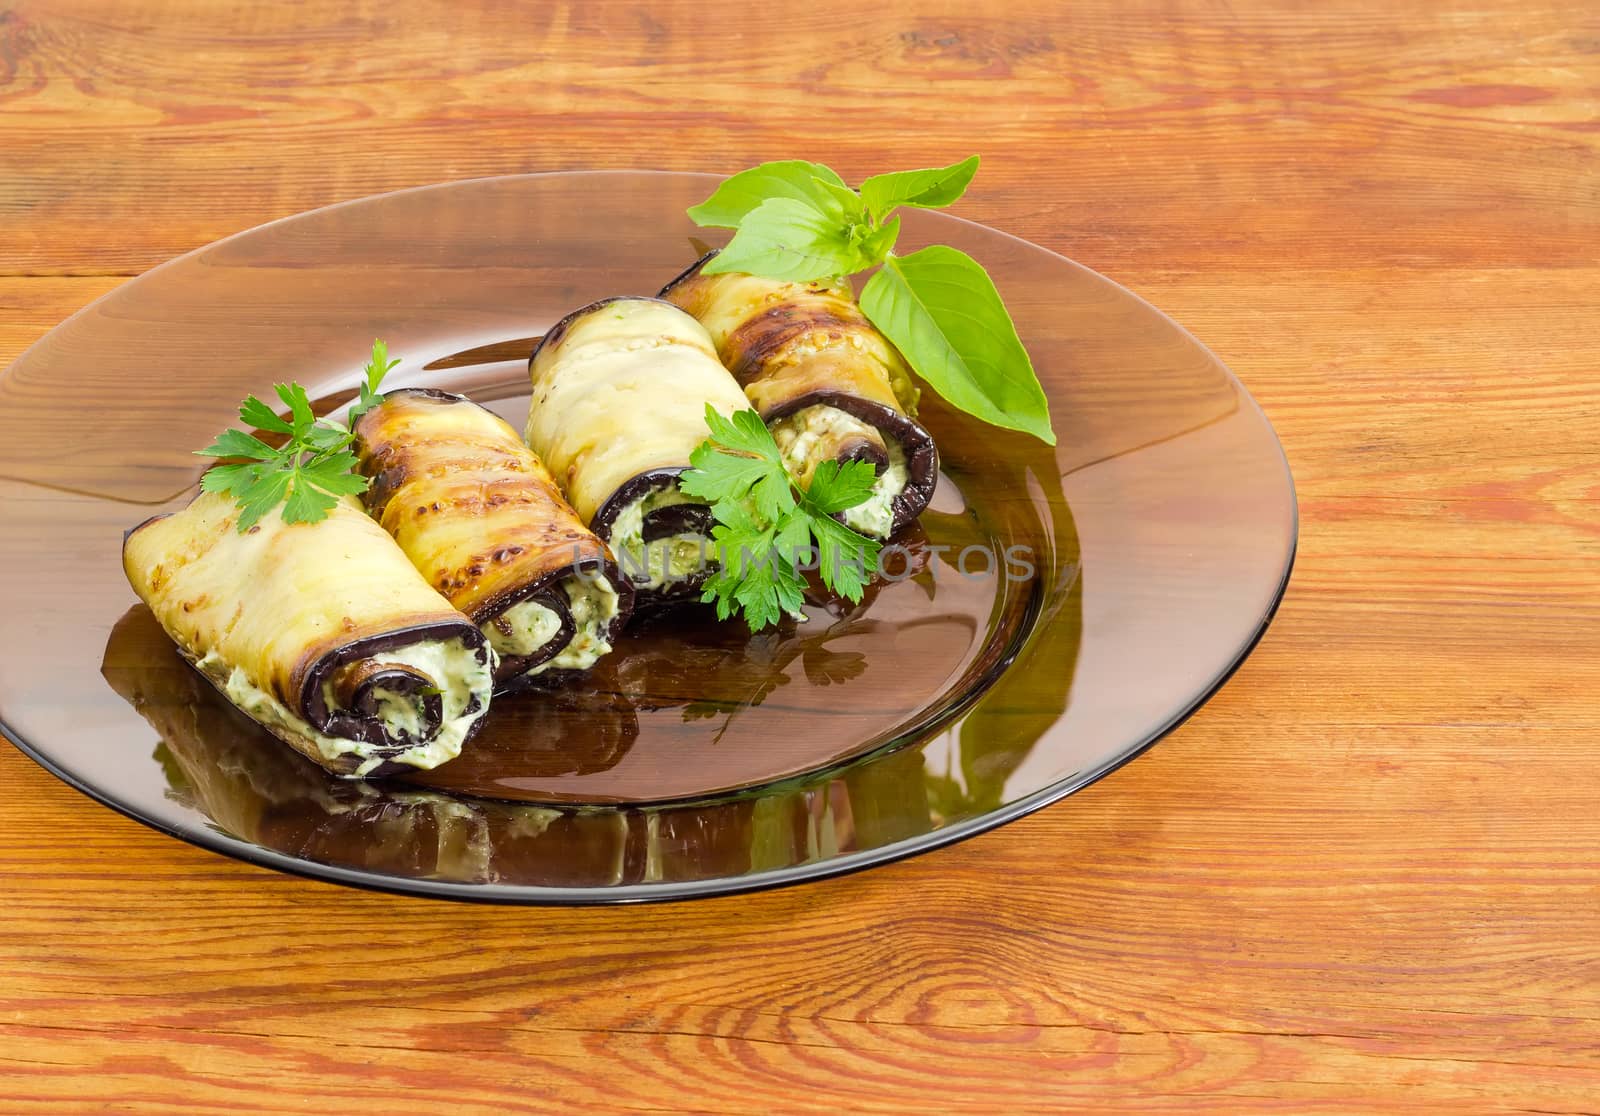 Fragment of a dark glass dish with several eggplant rolls stuffed with tuna and processed cheese and decorated with parsley and basil twigs on a surface of an old wooden planks
